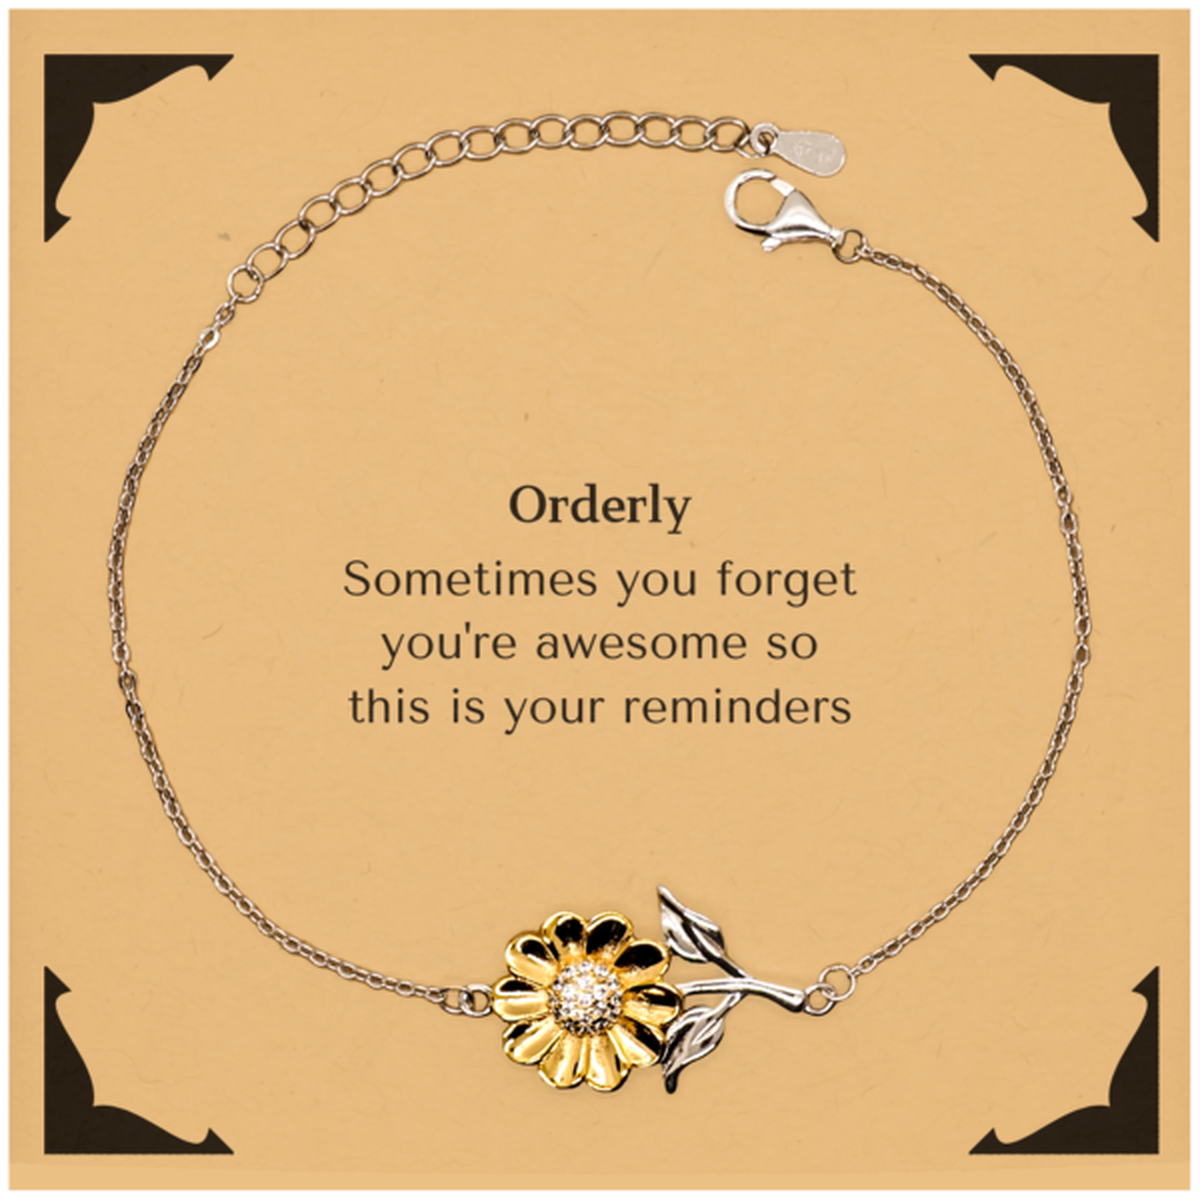 Sentimental Orderly Sunflower Bracelet, Orderly Sometimes you forget you're awesome so this is your reminders, Graduation Christmas Birthday Gifts for Orderly, Men, Women, Coworkers